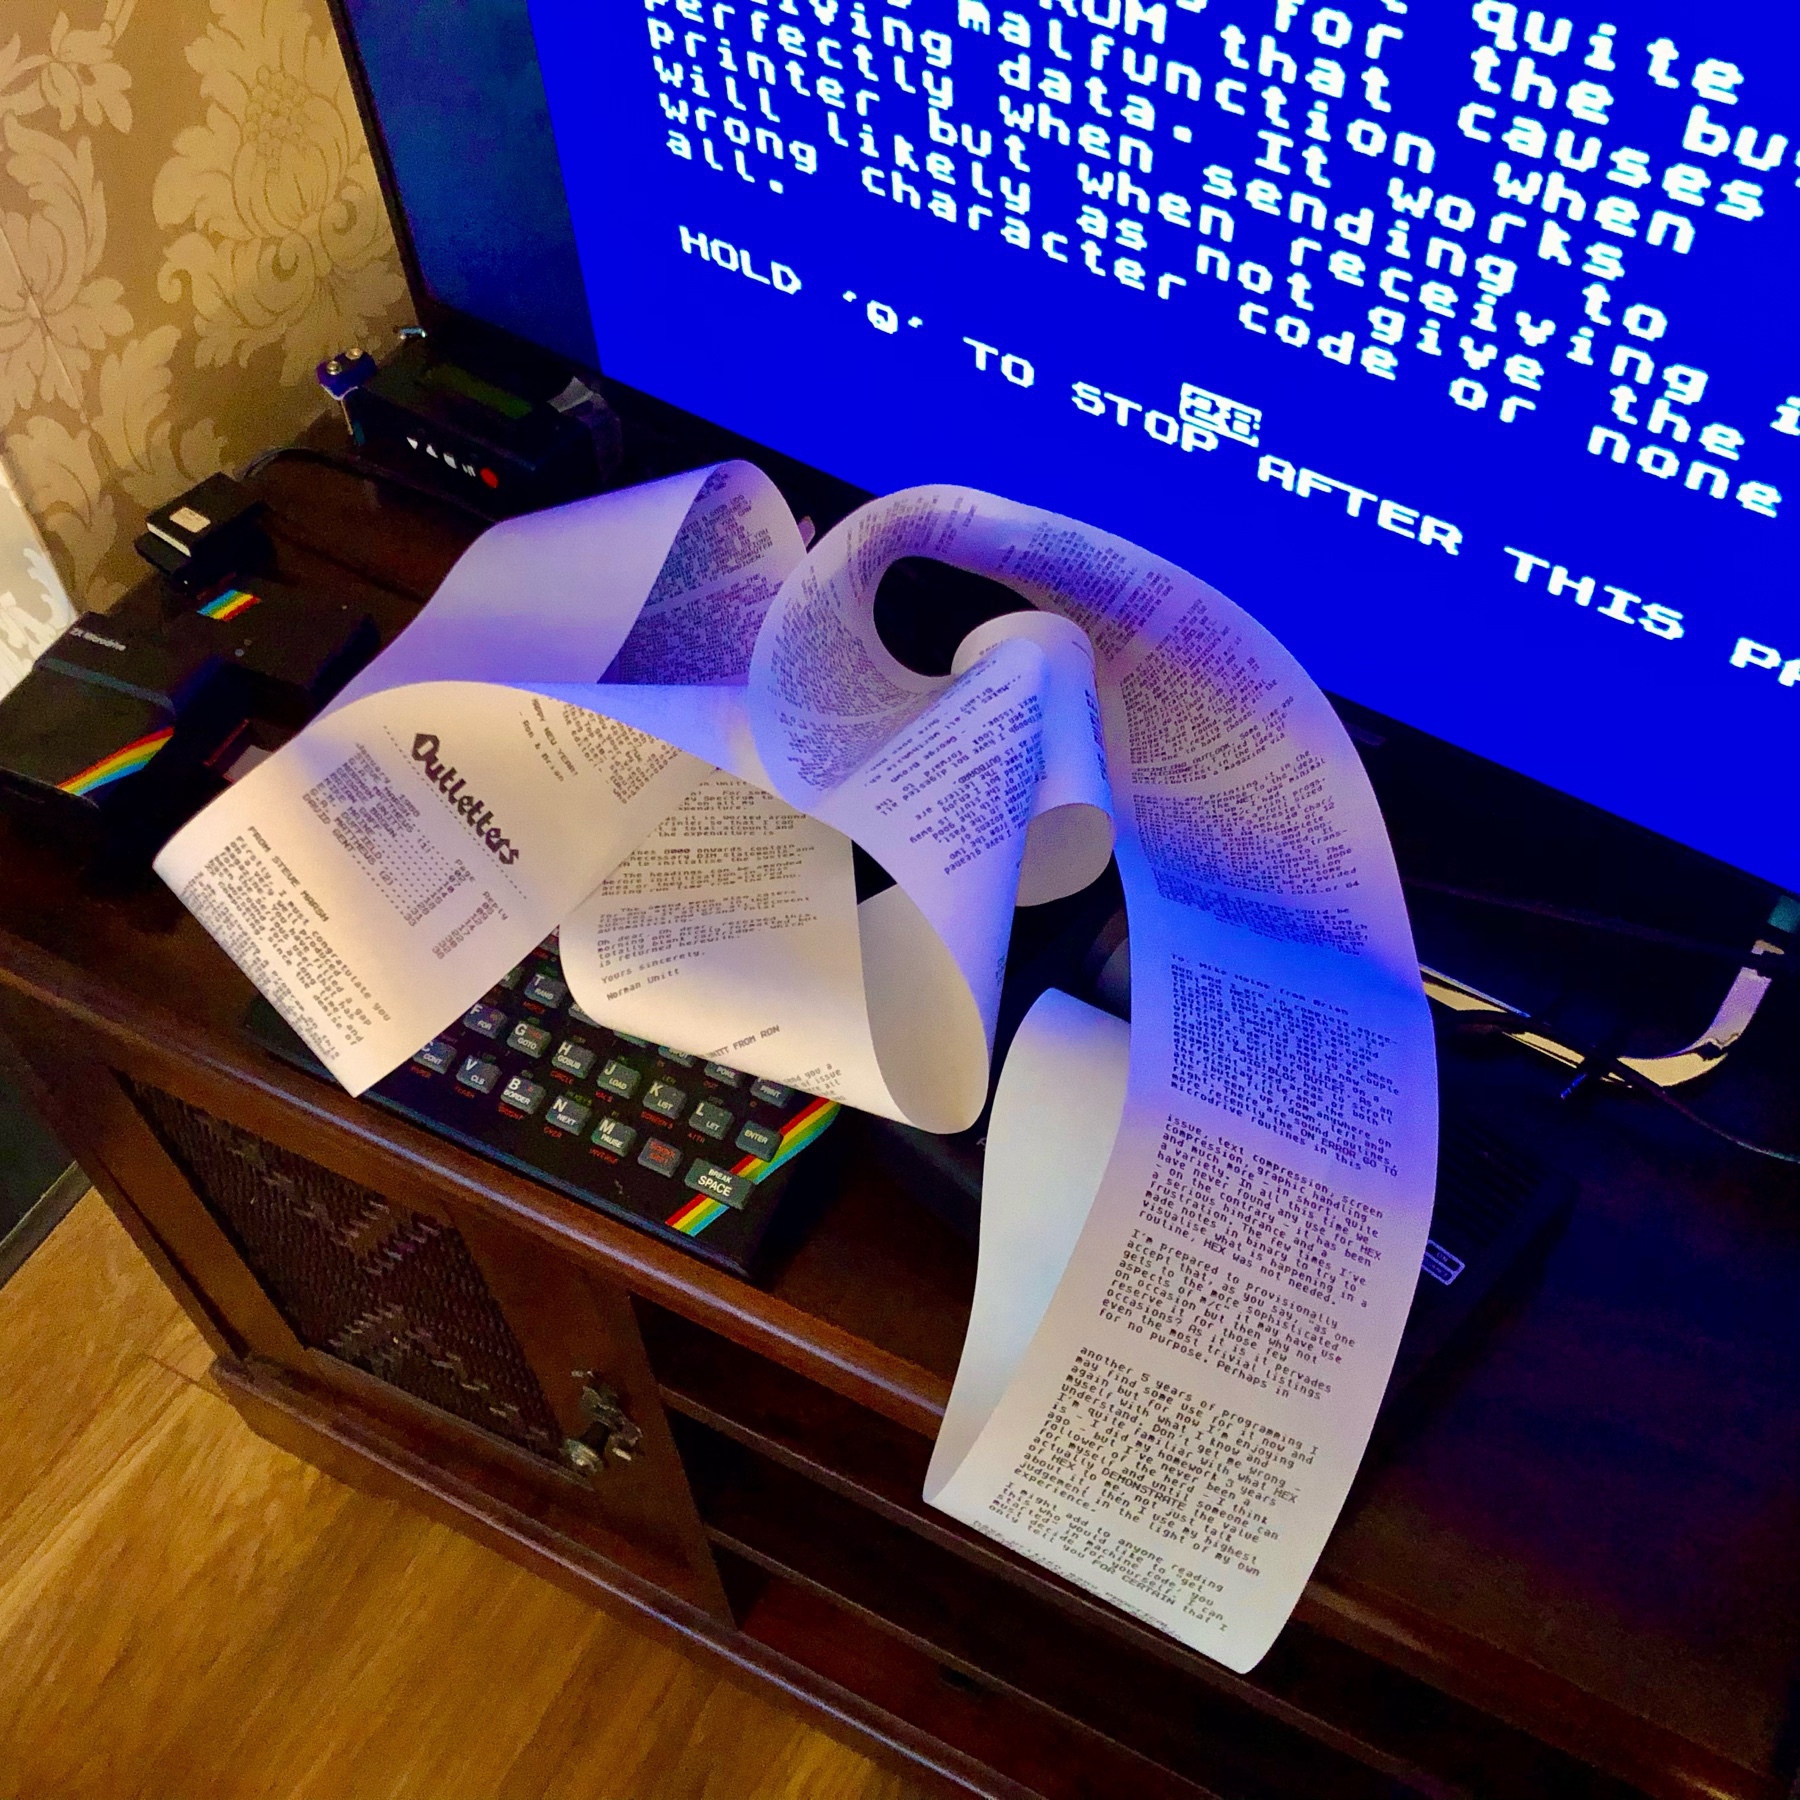 ZX Spectrum printing out on an Alphacom 32 and a long ream of thermal printer paper